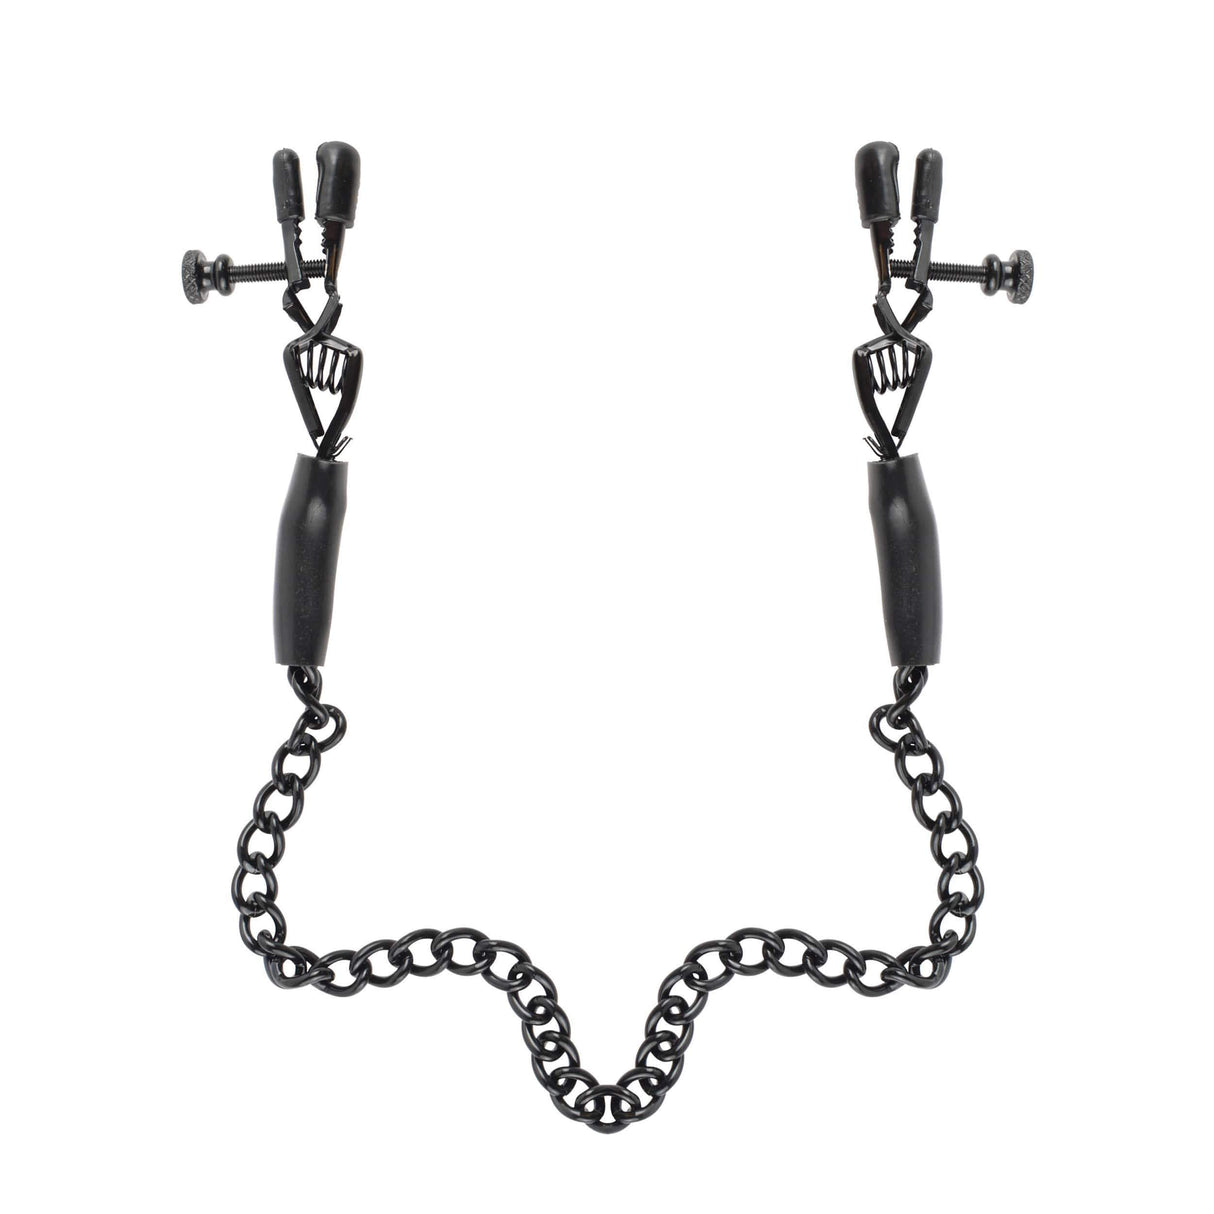 Pipedream - Fetish Fantasy Series Adjustable Nipple Chain Clamps (Black) PD1793 CherryAffairs